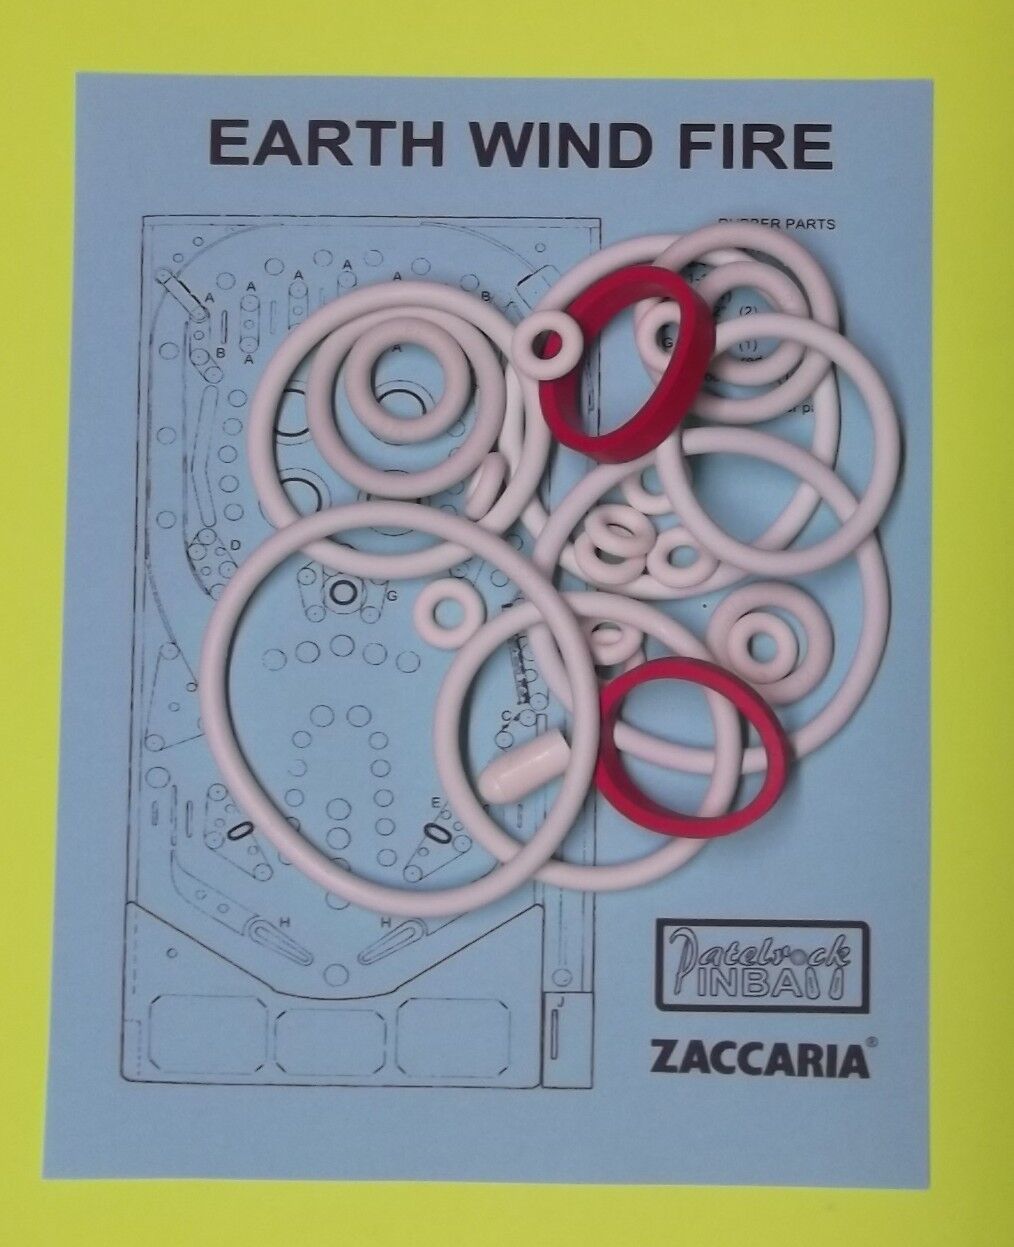 1981 Zaccaria Earth Wind Fire pinball rubber ring kit